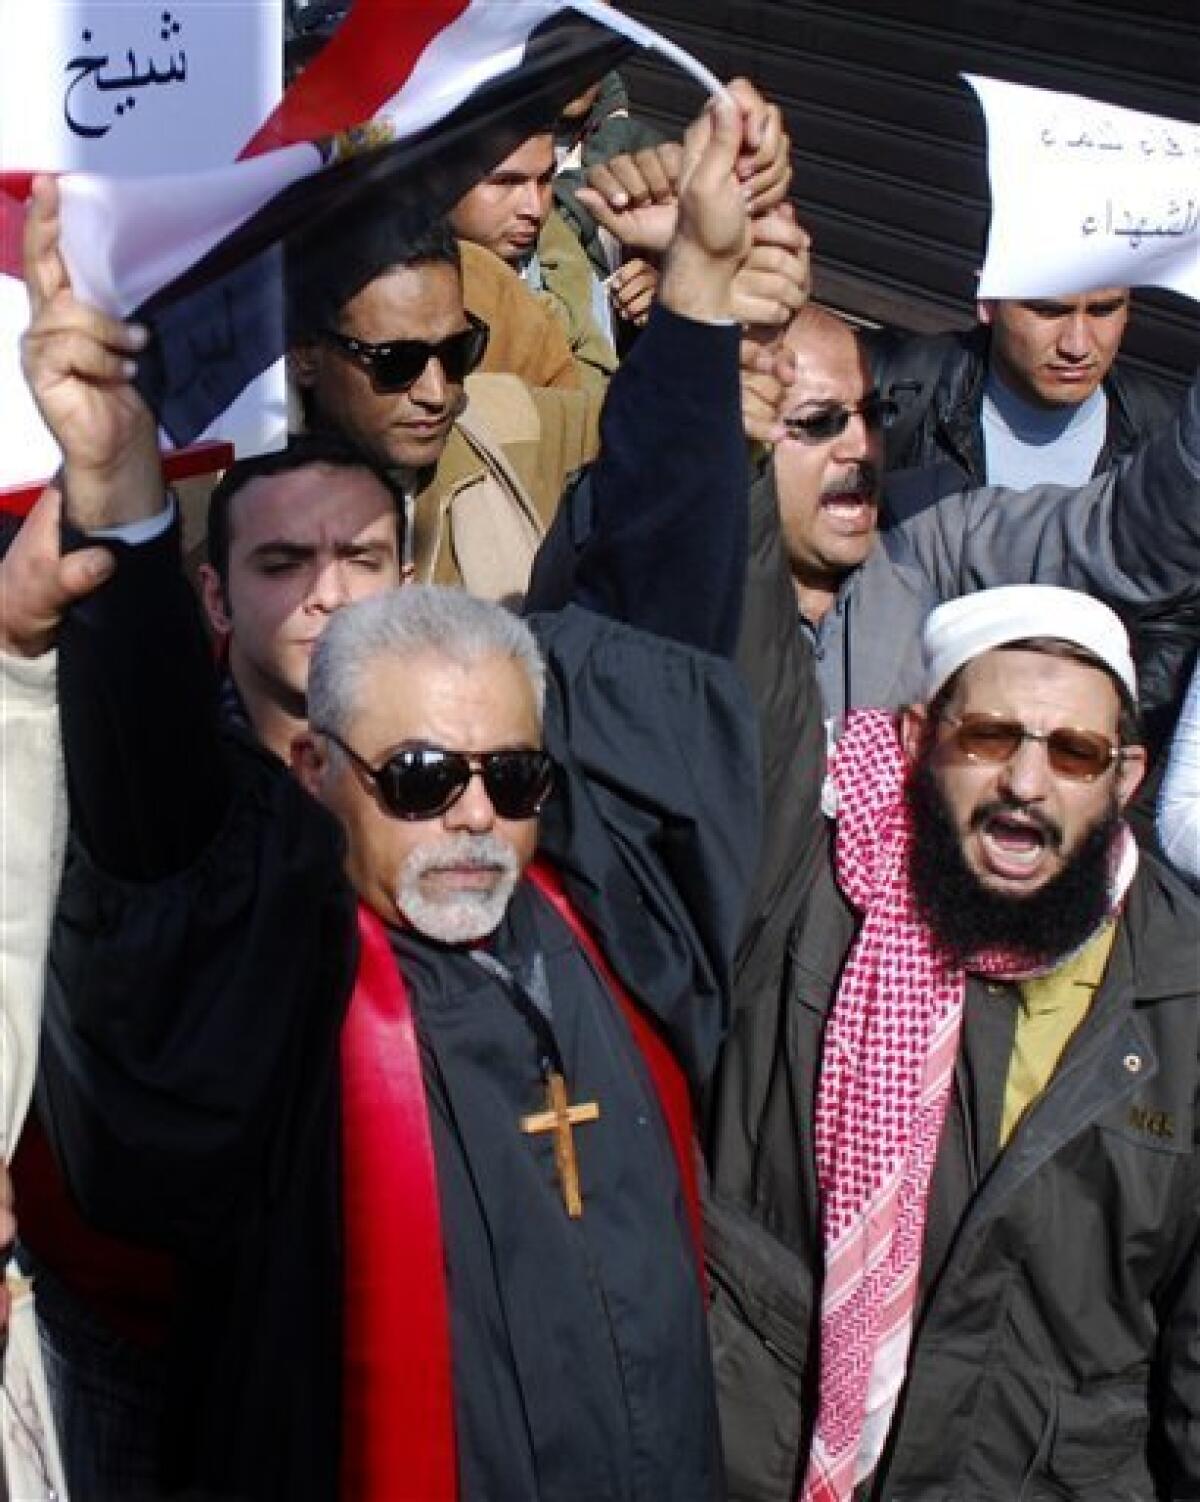 A Christian Coptic priest, left, and other demonstrators arrive in Tahrir, or Liberation, Square in Cairo, Egypt, Tuesday, Feb. 1, 2011. Security officials say authorities have shut down all roads and public transportation to Cairo, where tens of thousands of people are converging to demand the ouster of Egyptian President Hosni Mubarak after nearly 30 years in power. (AP Photo/Mohammed Abu Zaid)